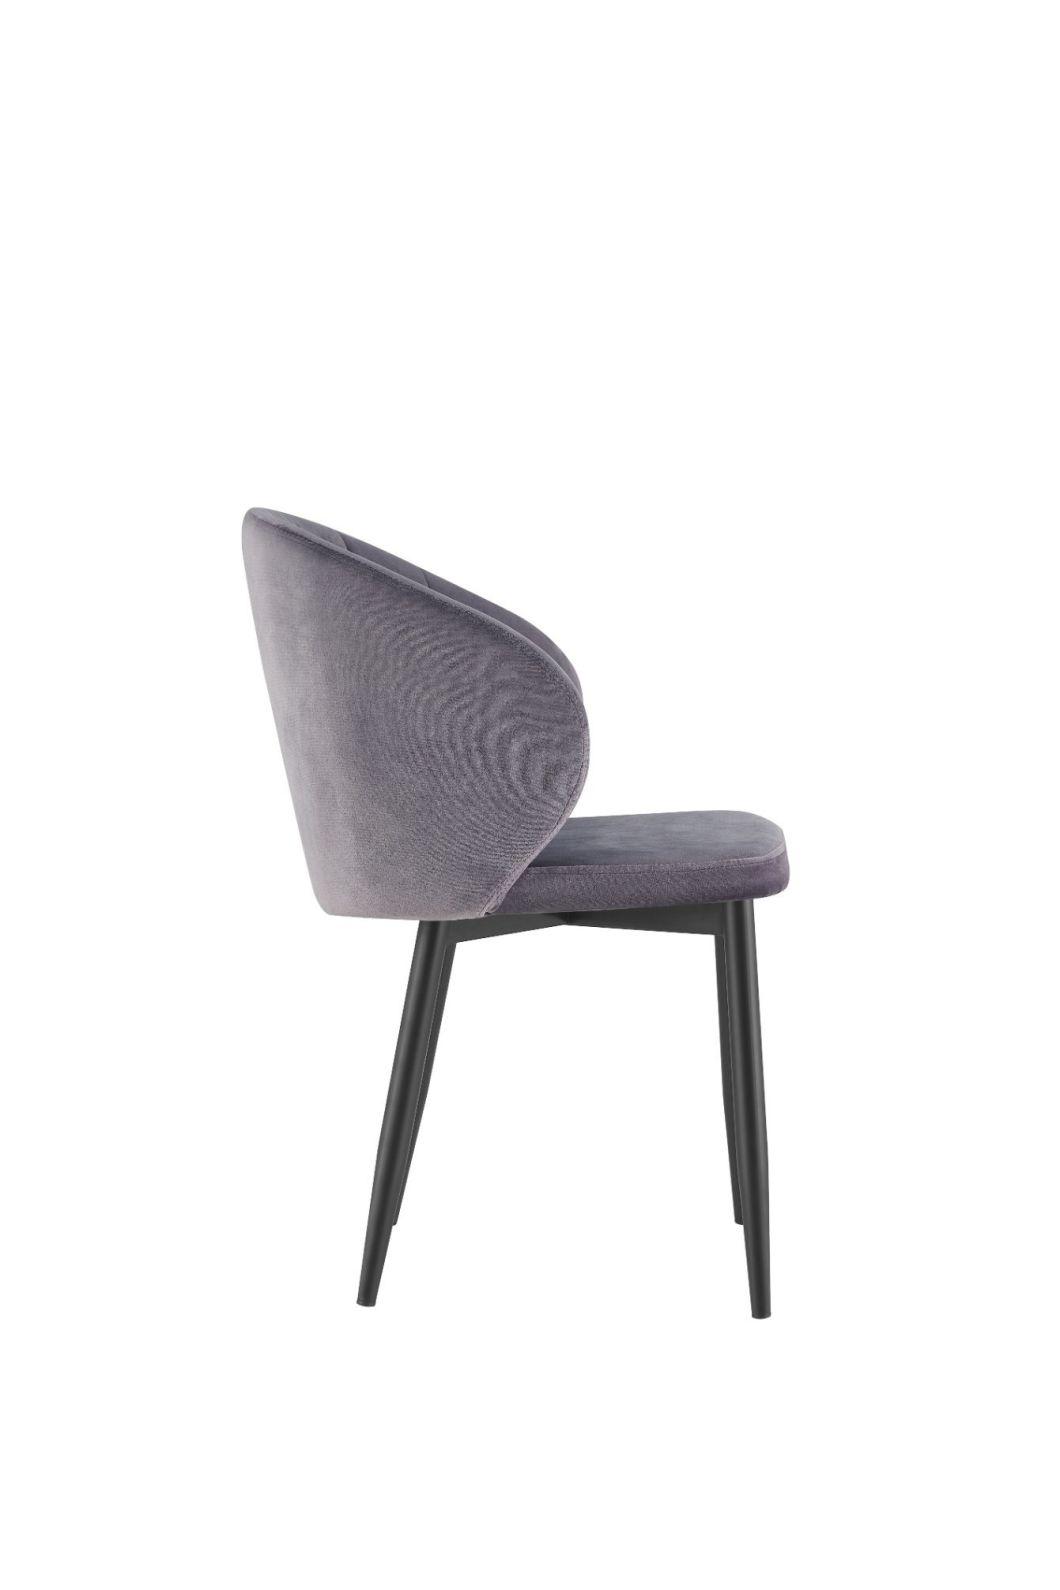 Modern Hot Selling Nordic Indoor Home Furniture Room Restaurant Dining Chairs